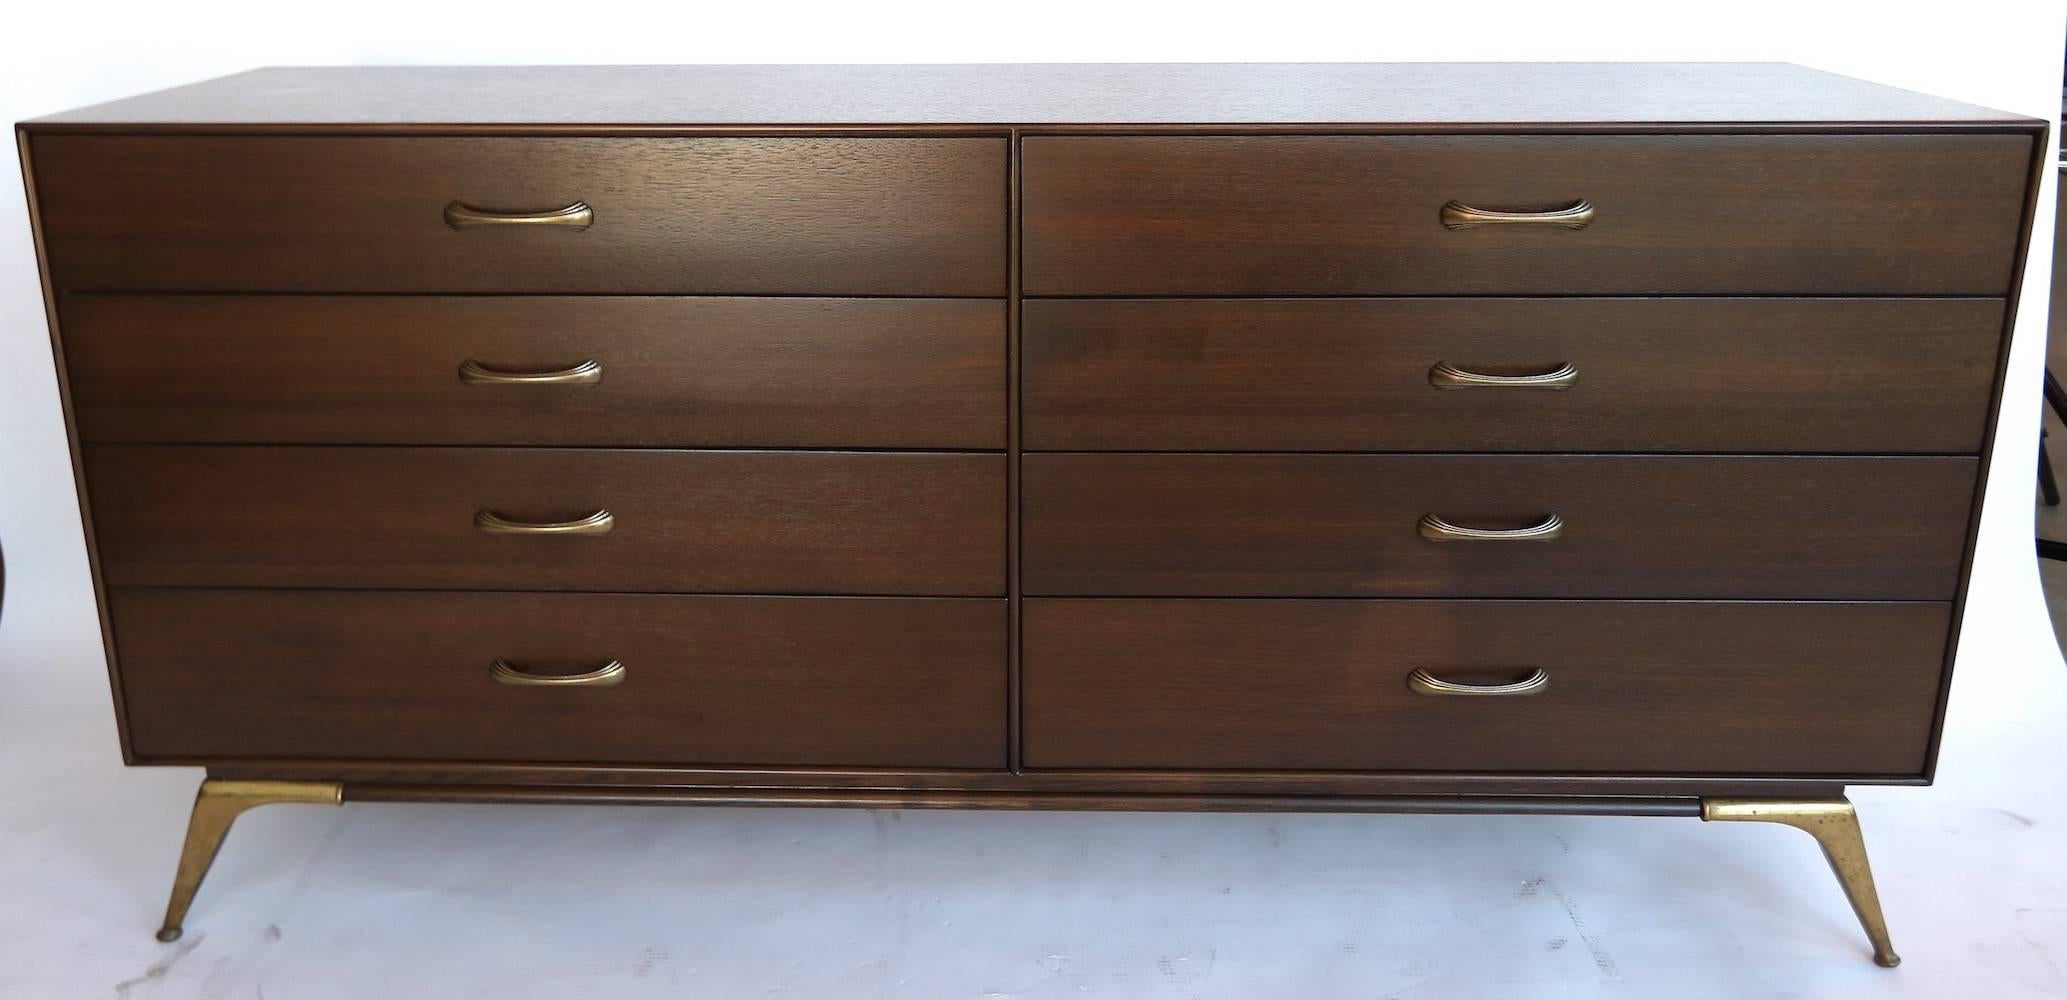 Mid-20th Century 1960s, RWAY Brown Wood Dresser or Sideboard with Brass Accents For Sale